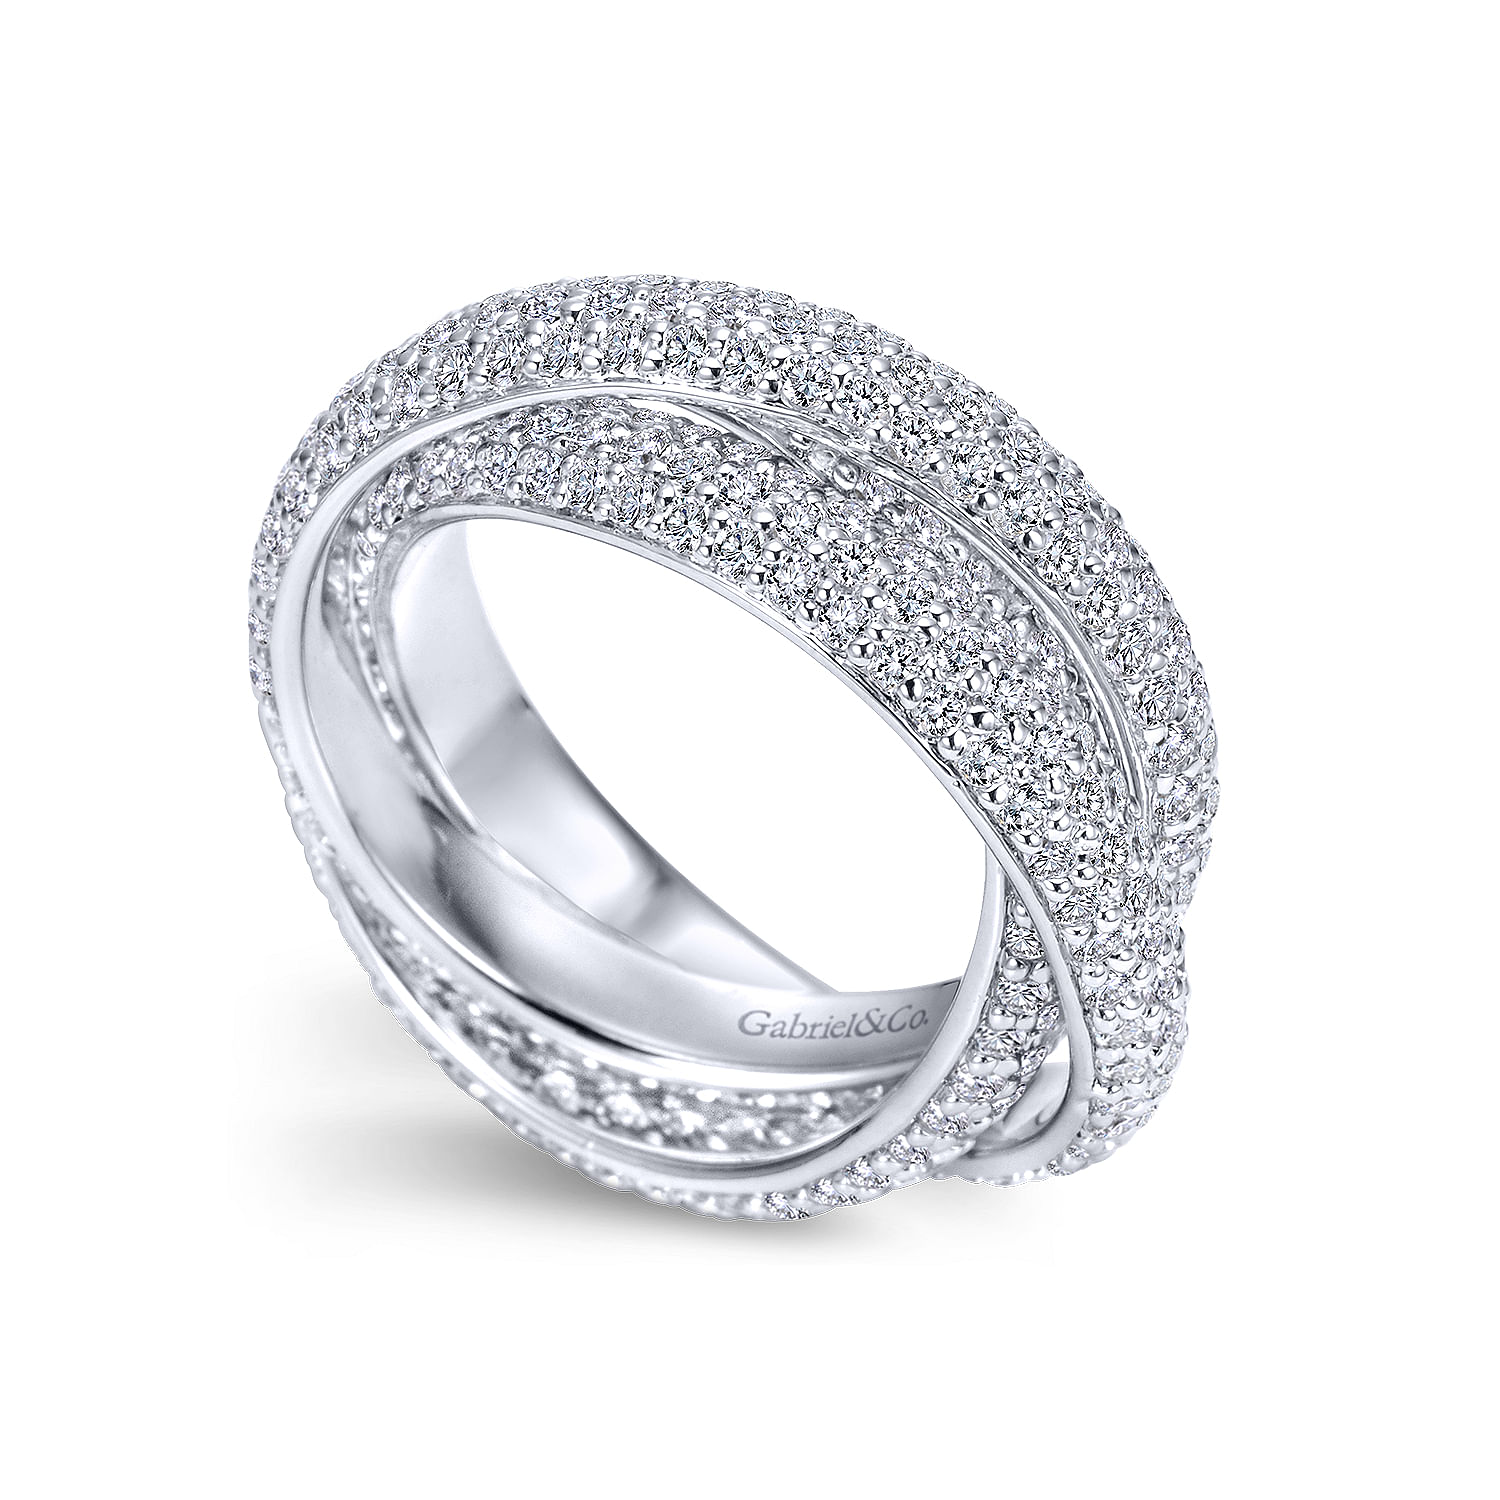 3 Row 14K White Gold Intersecting Pave Diamond Eternity Band